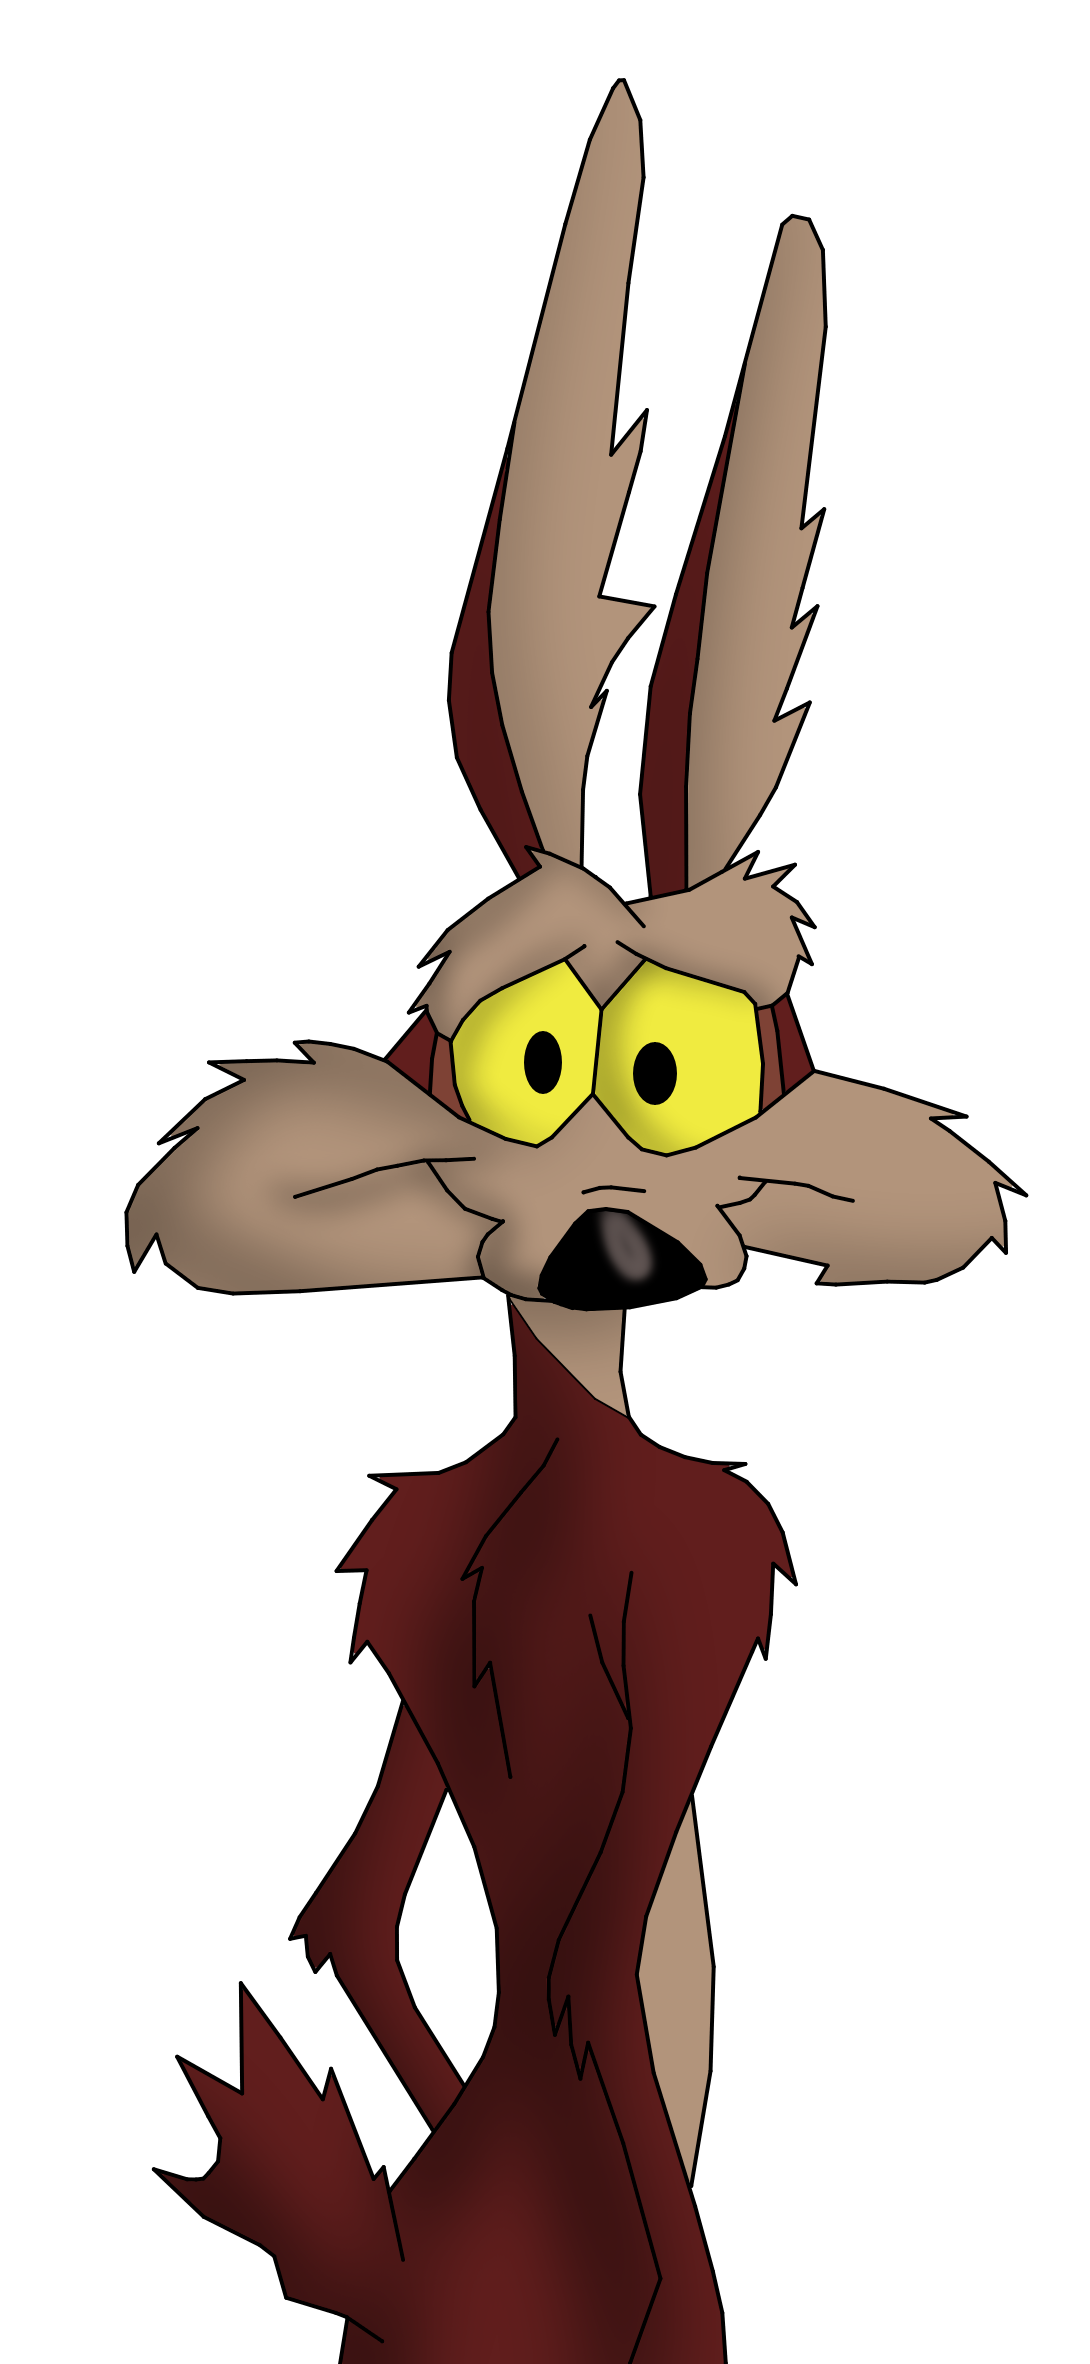 Wile E Why Me by CaptainEdwardTeague on DeviantArt